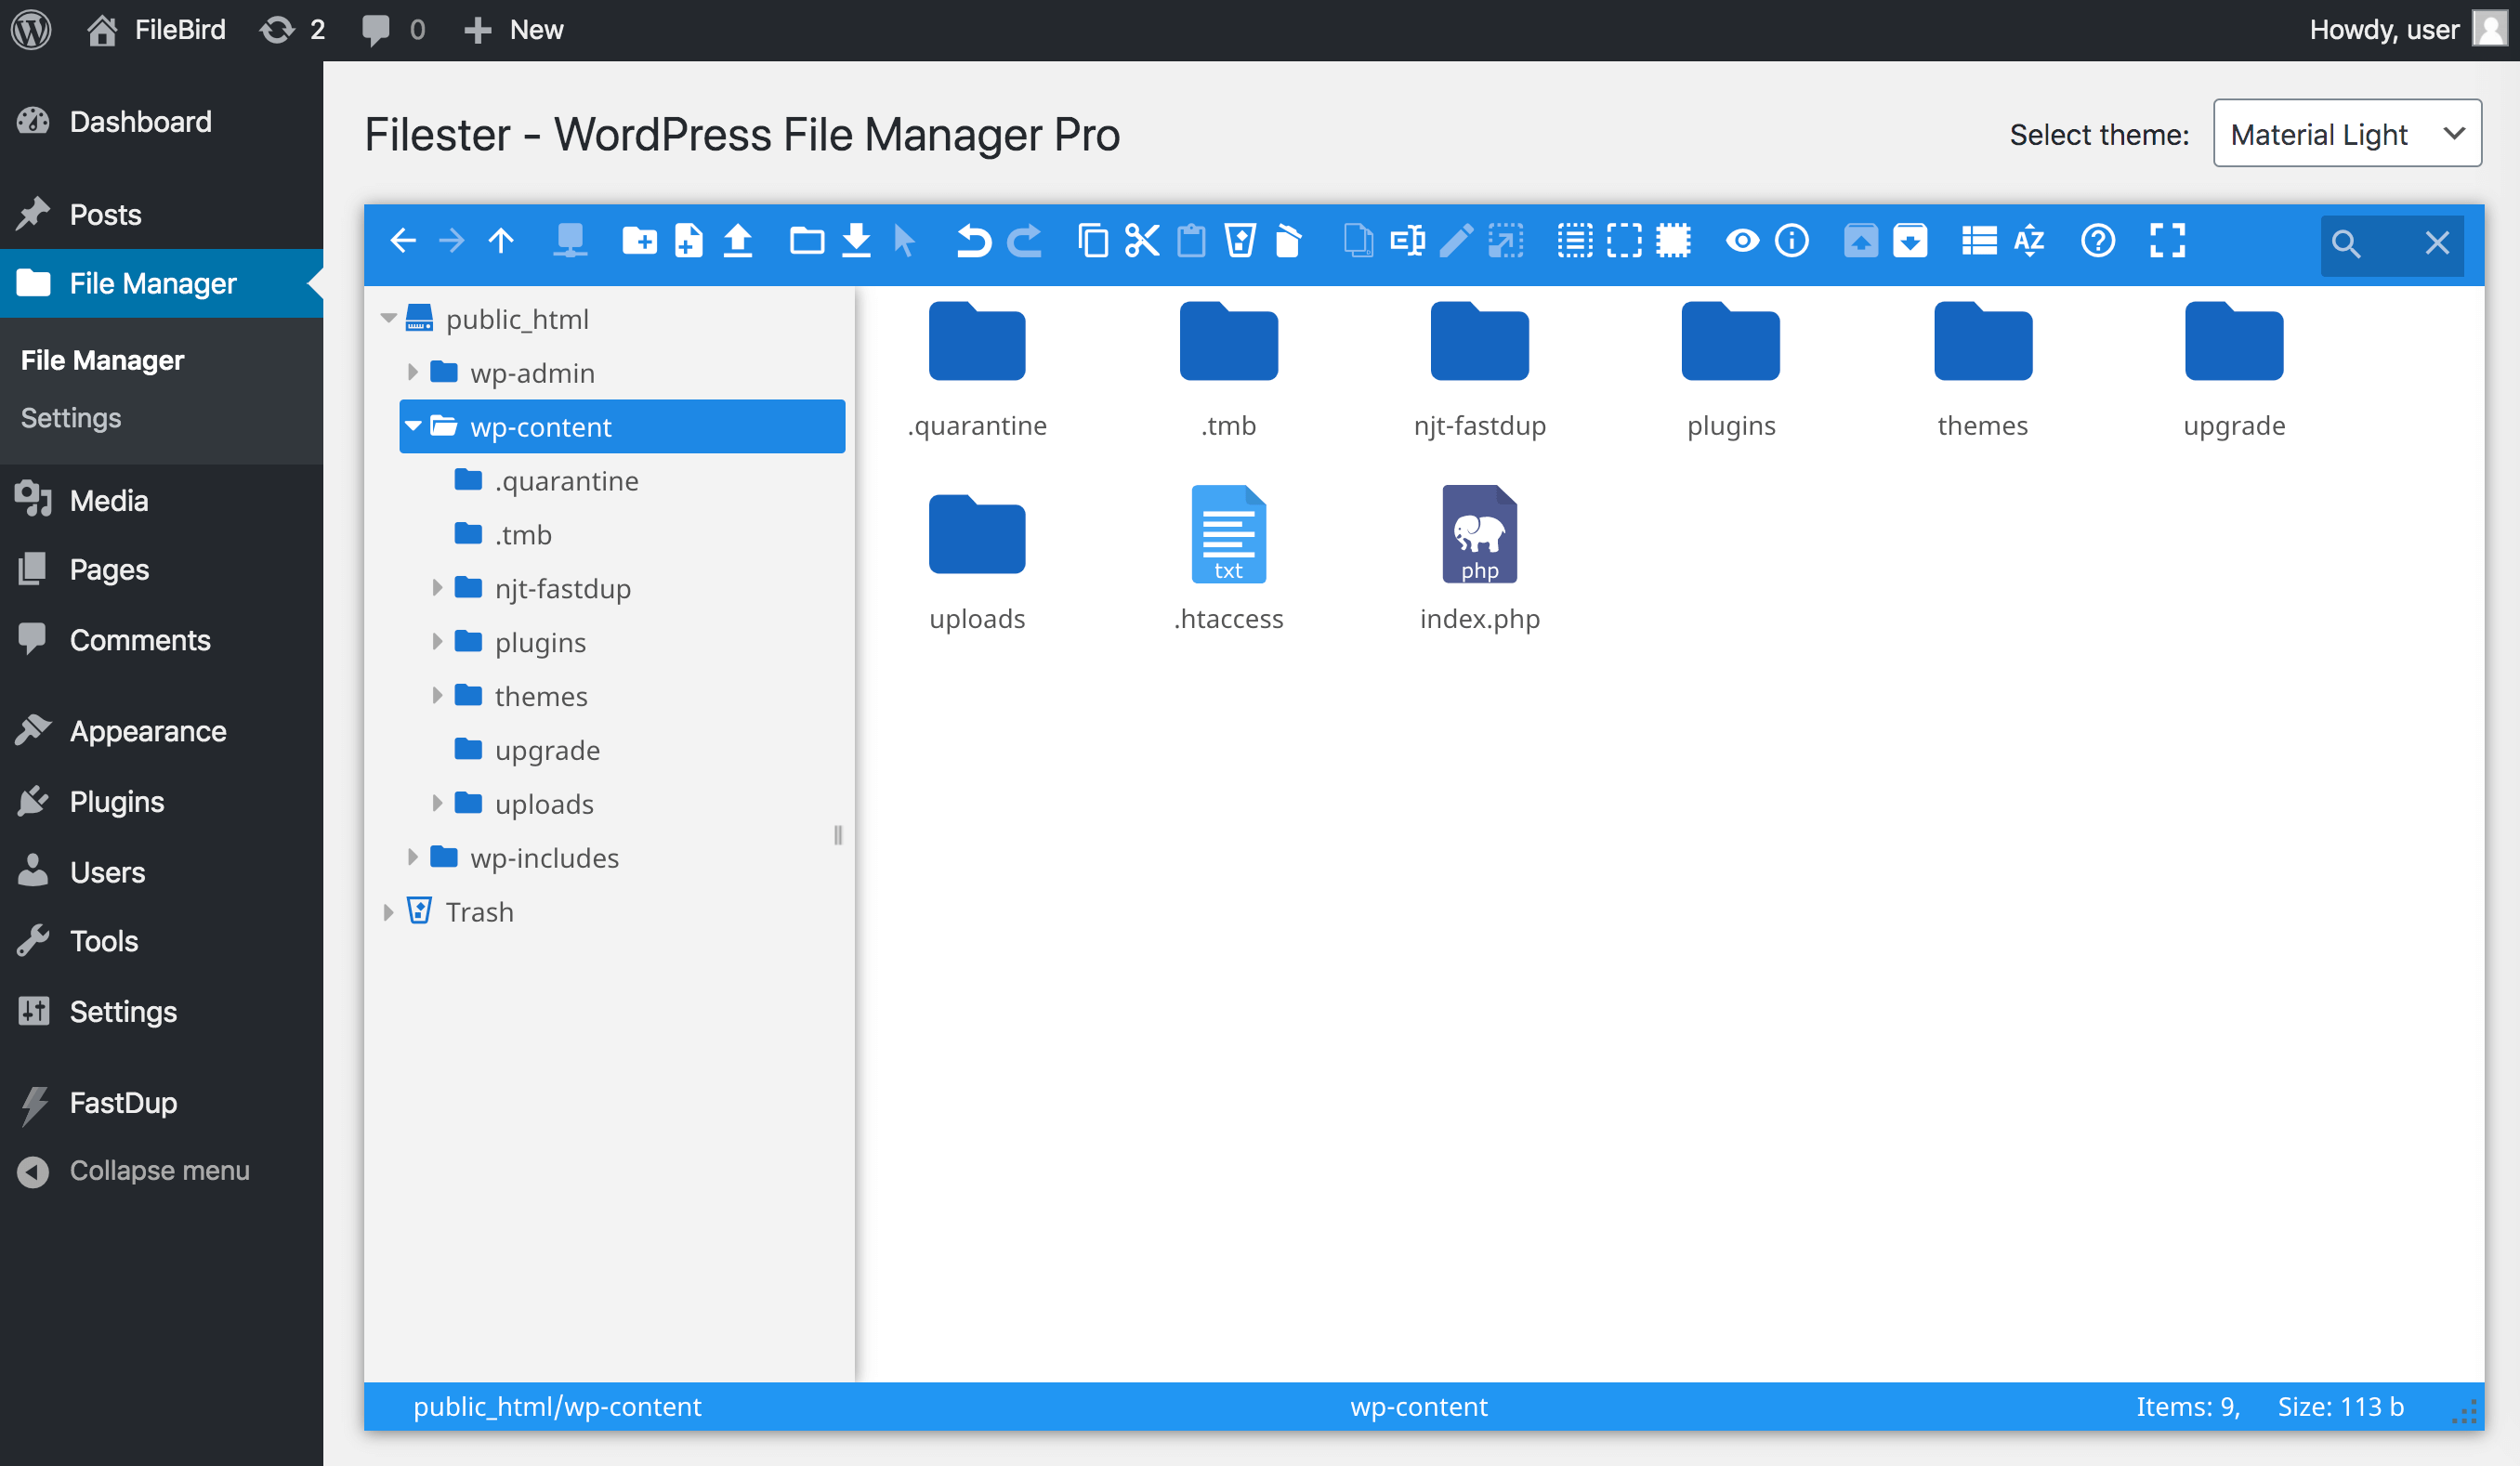 Filester file manager pro user interface